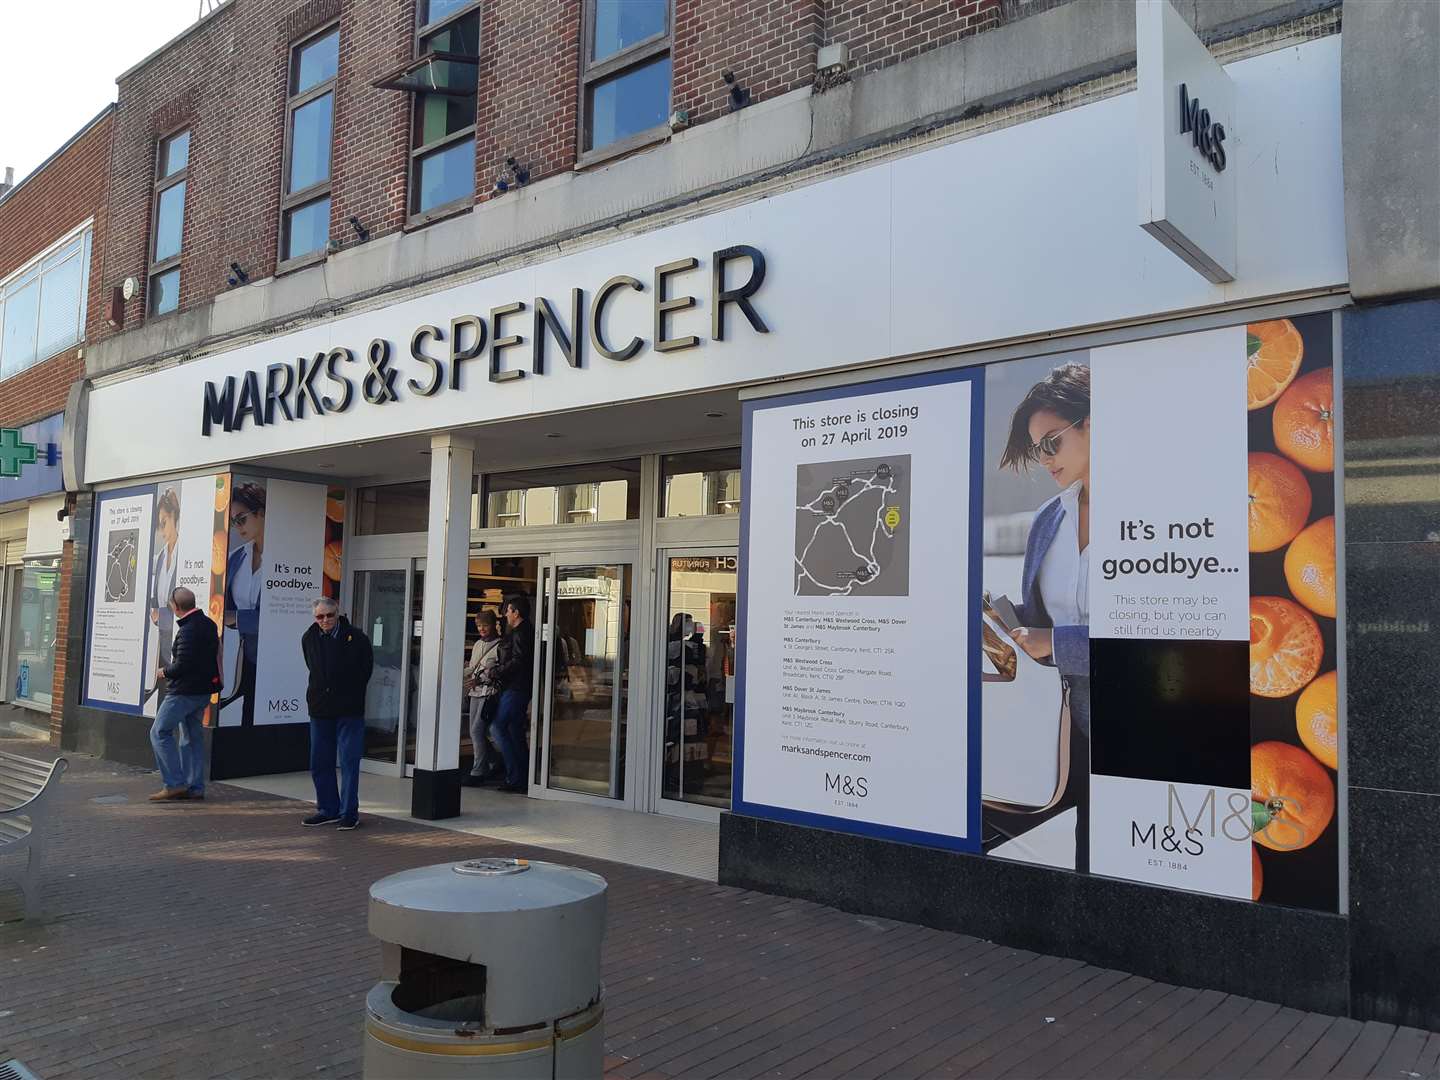 M&S will close in April (8136957)